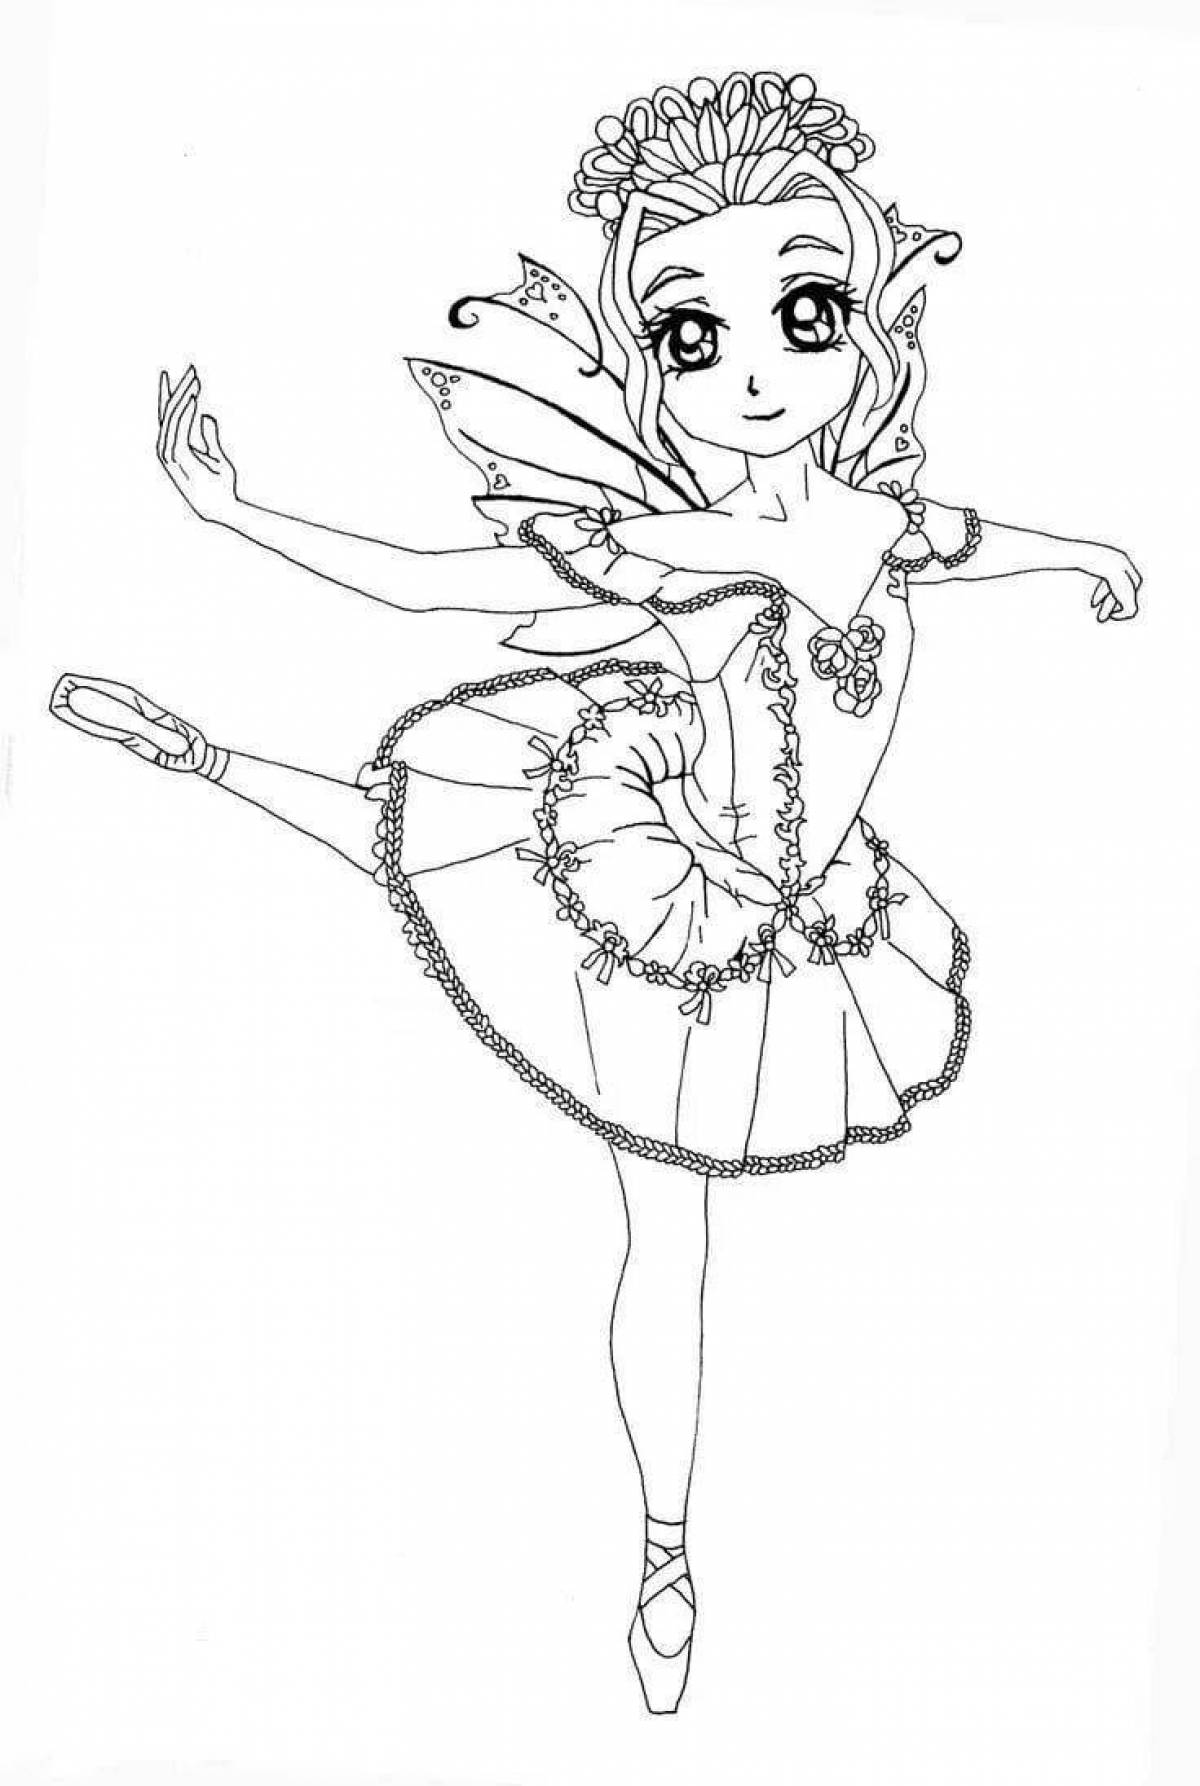 Coloring page graceful ballerina for girls